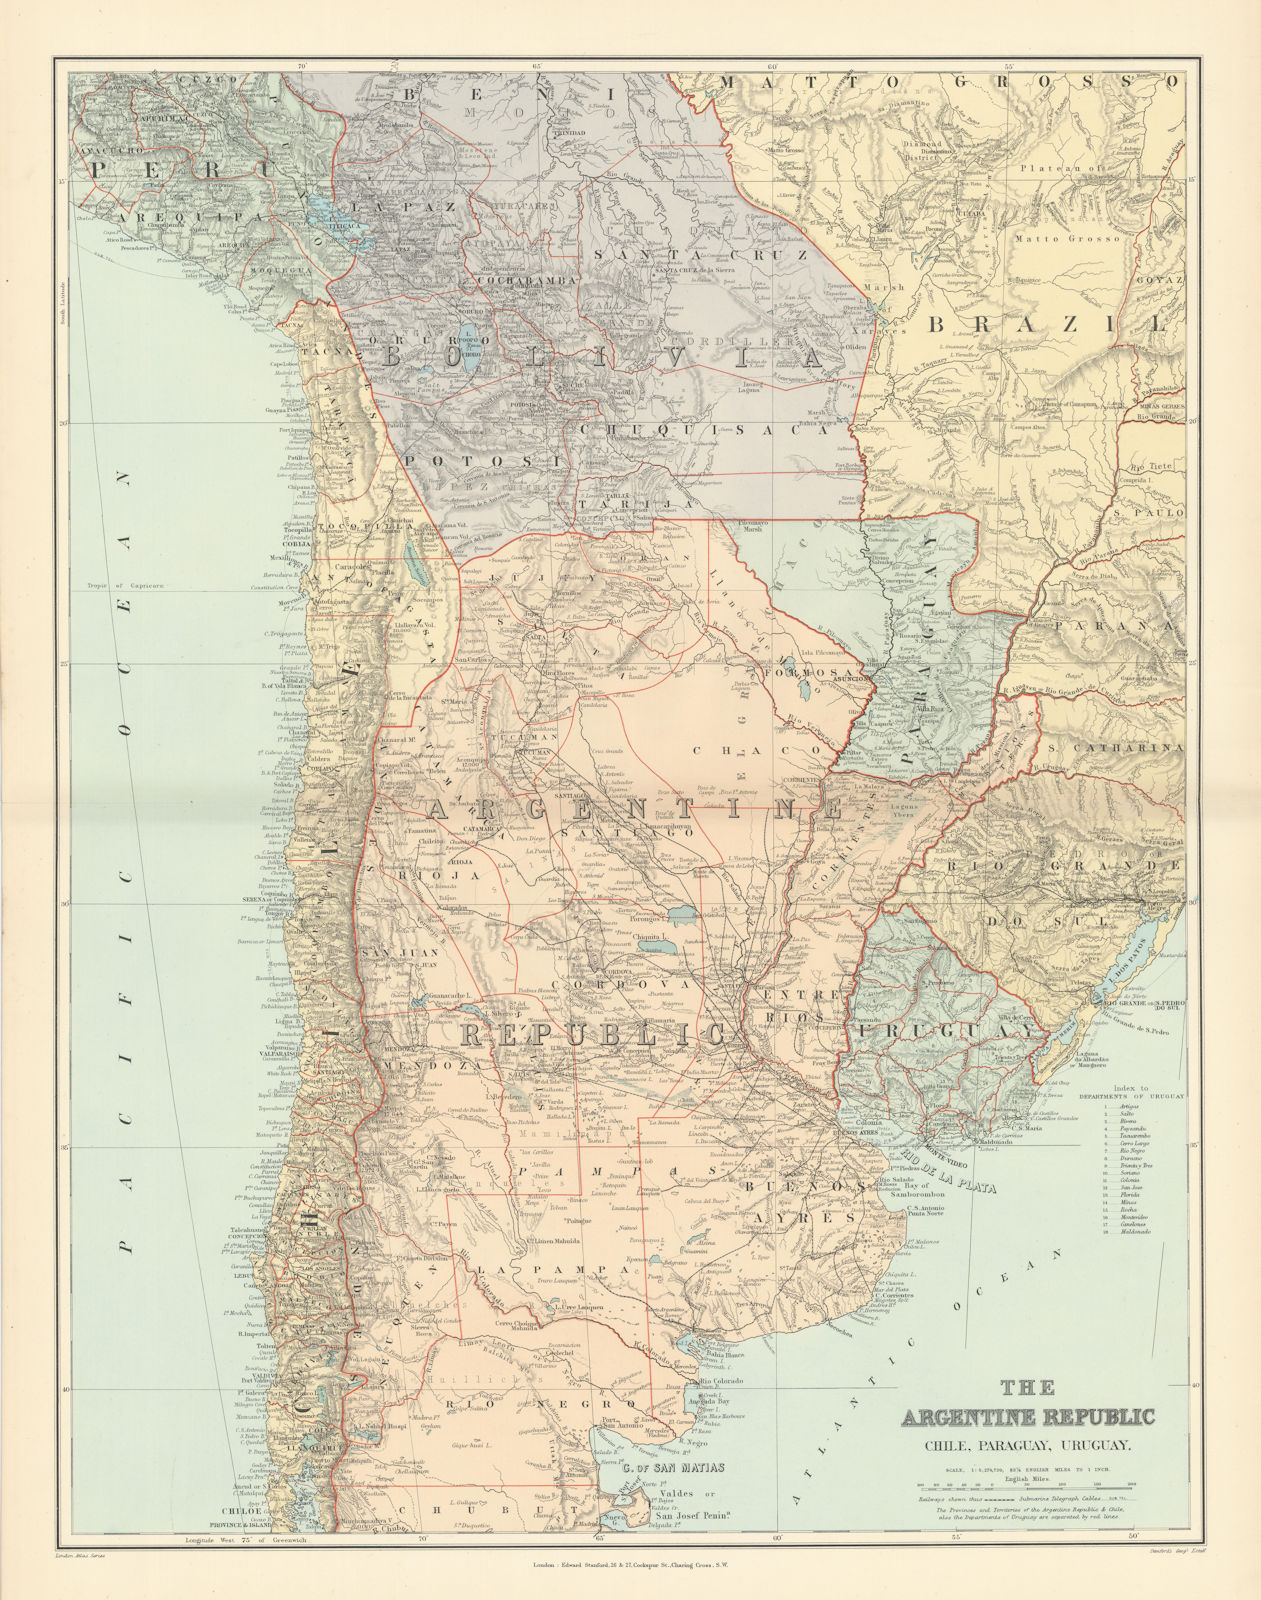 Argentine Republic, Chile, Paraguay & Uruguay. South America. STANFORD 1896 map